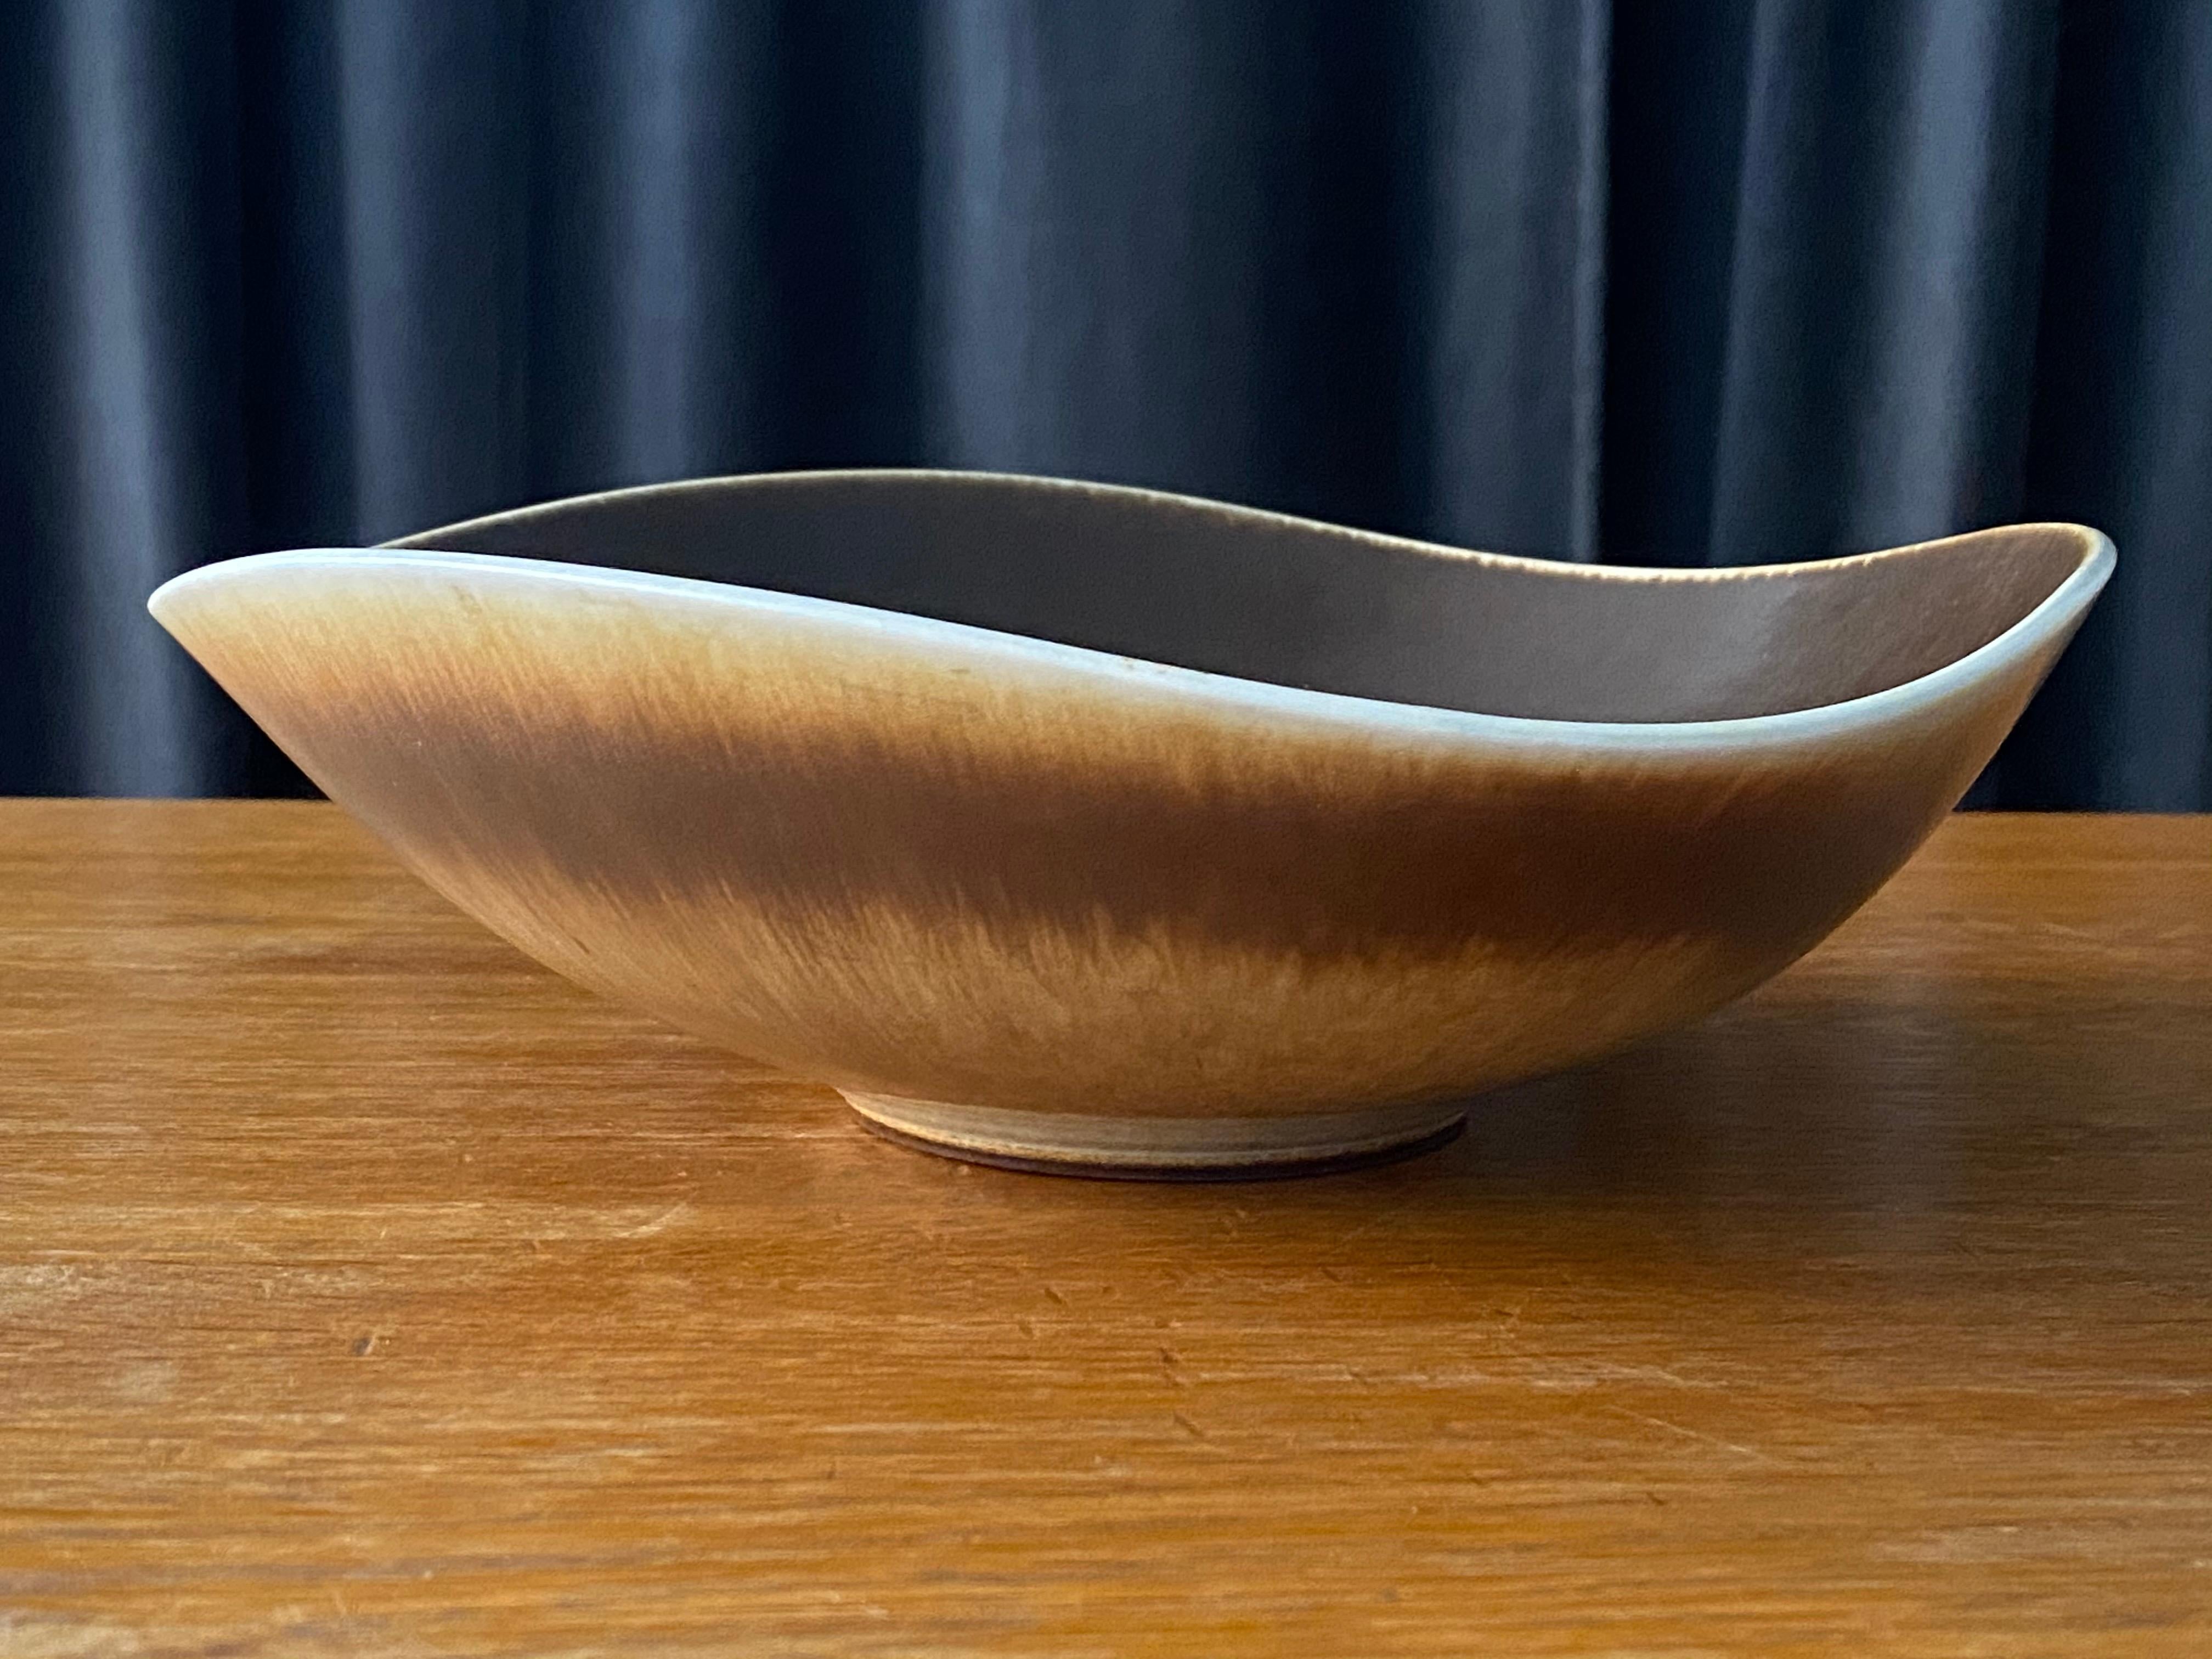 An organically shaped and sizable ceramic stoneware bowl / dish by Berndt Friberg for the iconic Swedish firm Gustavsberg. Signed. The highly artistic glaze contains brown / beige and white pigments.

Other ceramicists of the period include Berndt